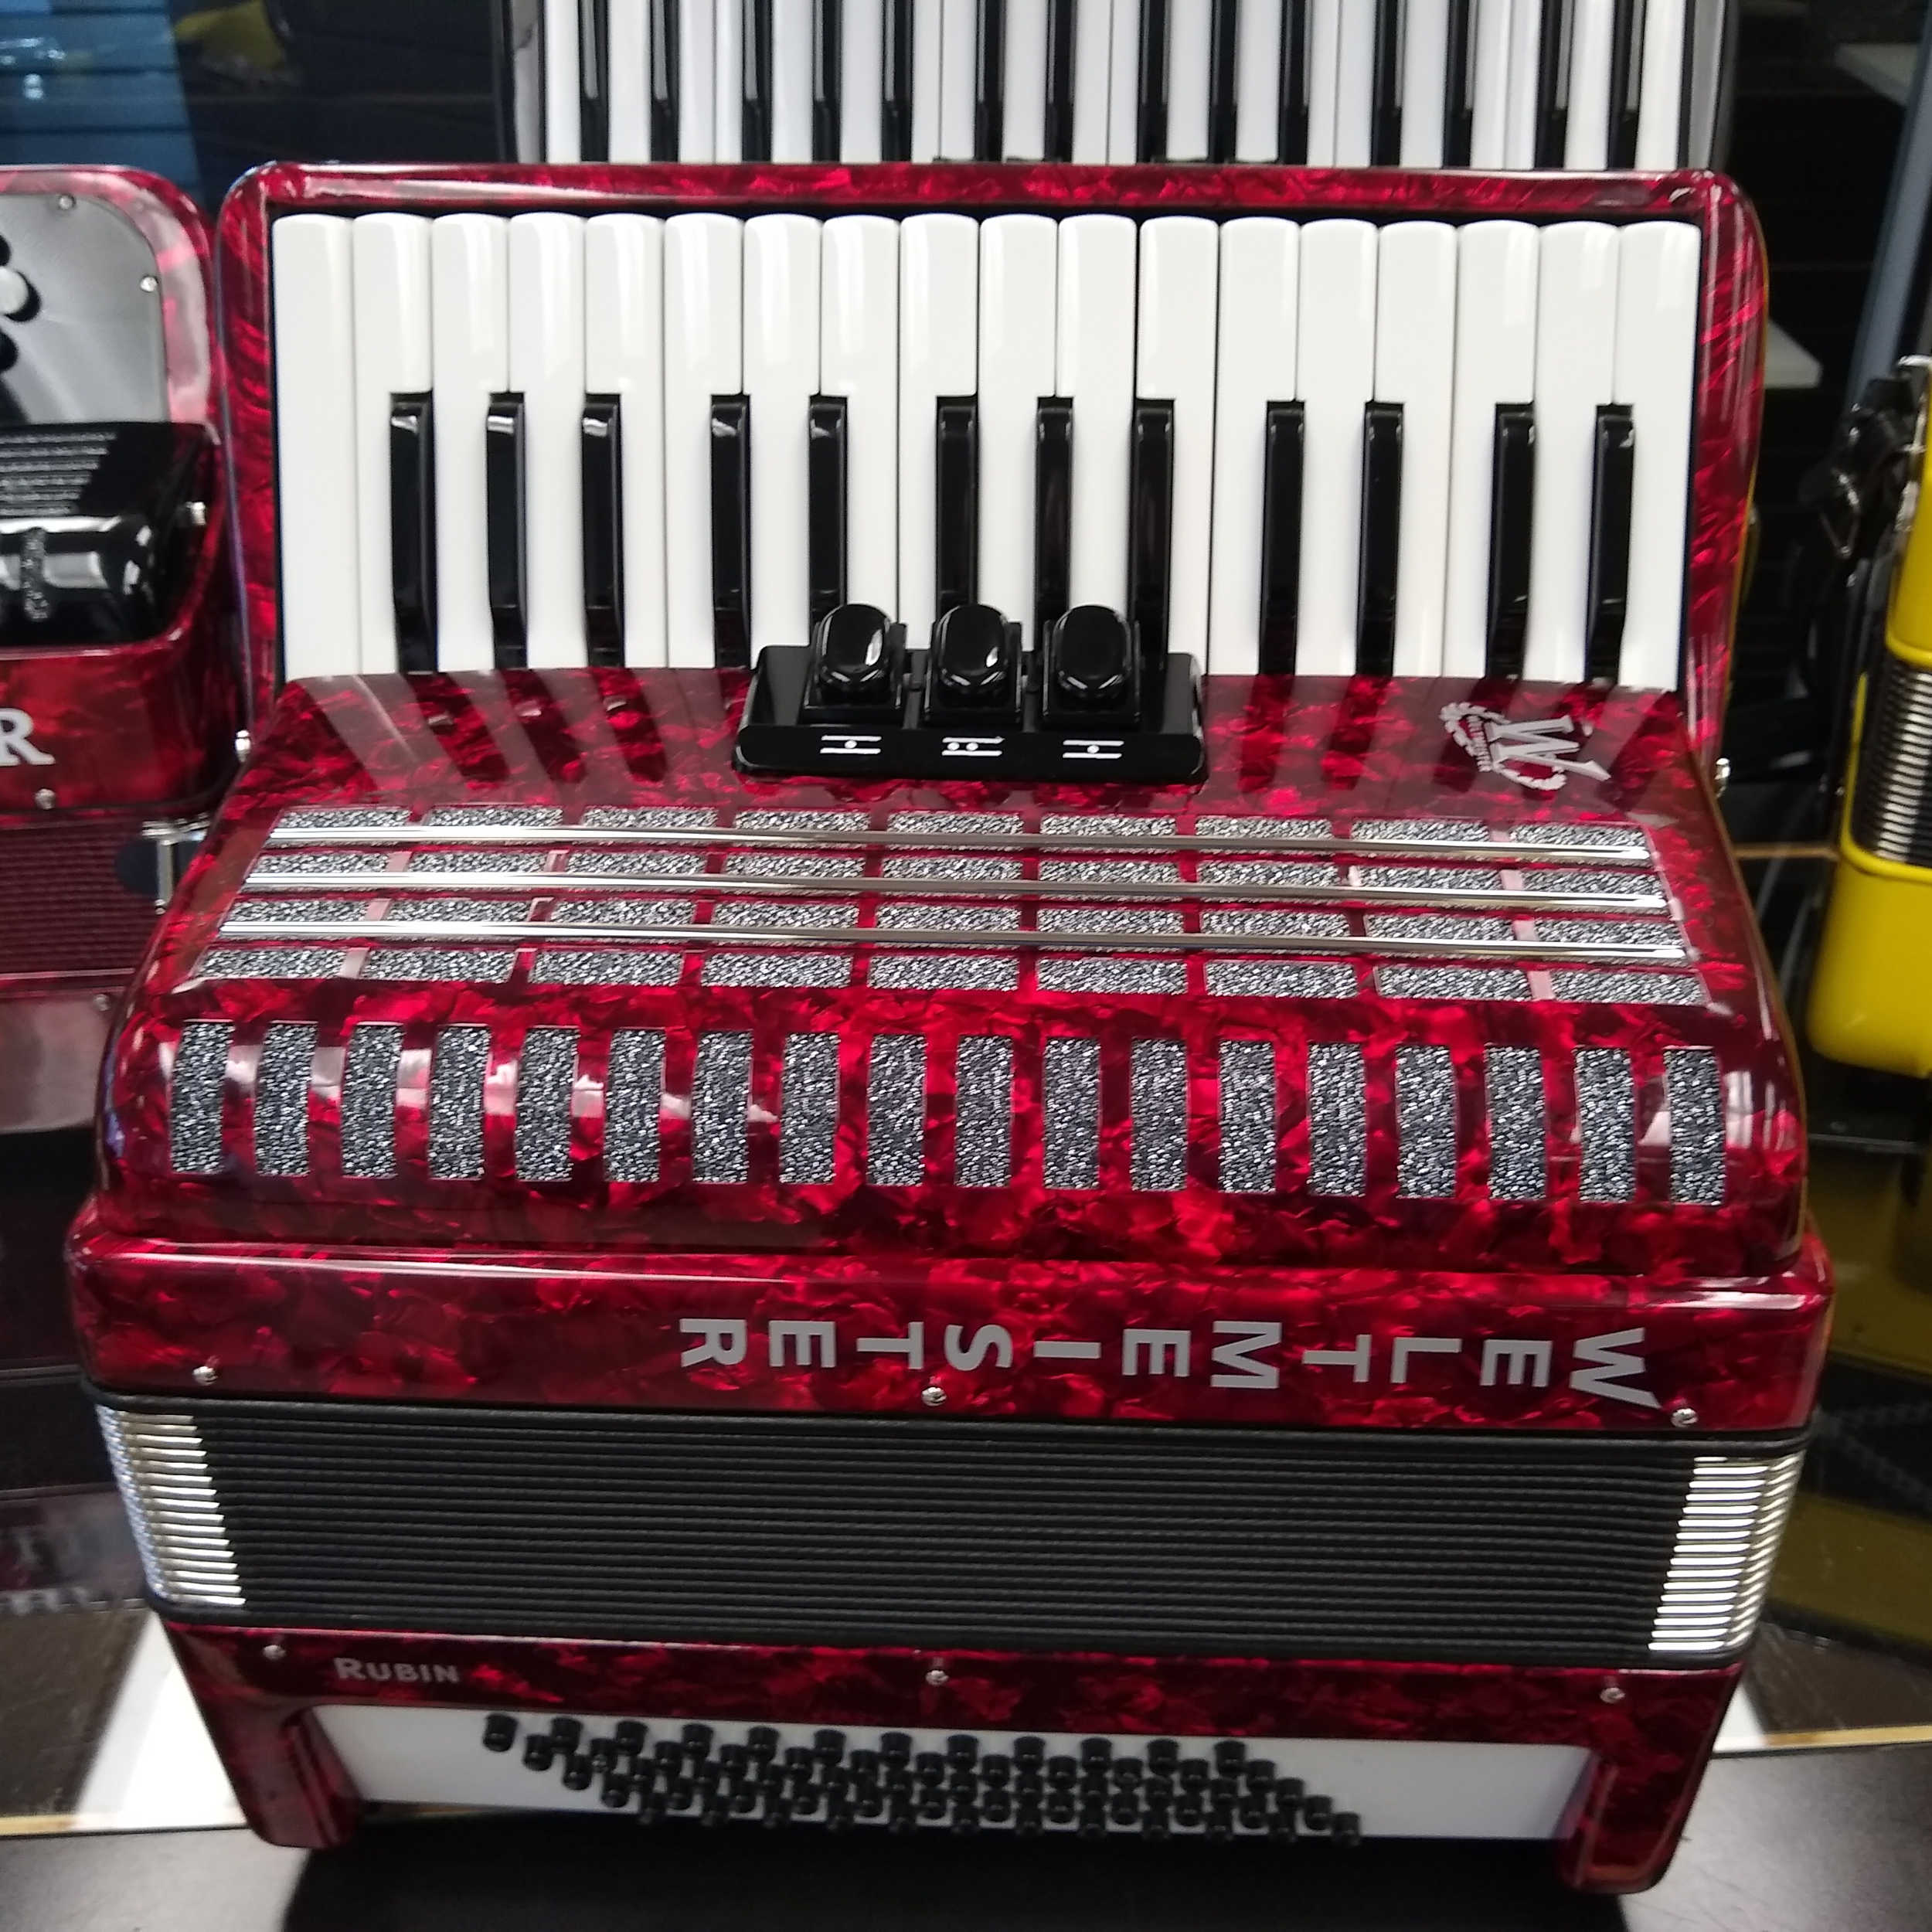 Hohner 1304-RED 26 Key Accordion 48 Bass Style Keyboard Piano Accordion in Red Bundle with Zorro Sounds piano accordion cloth 